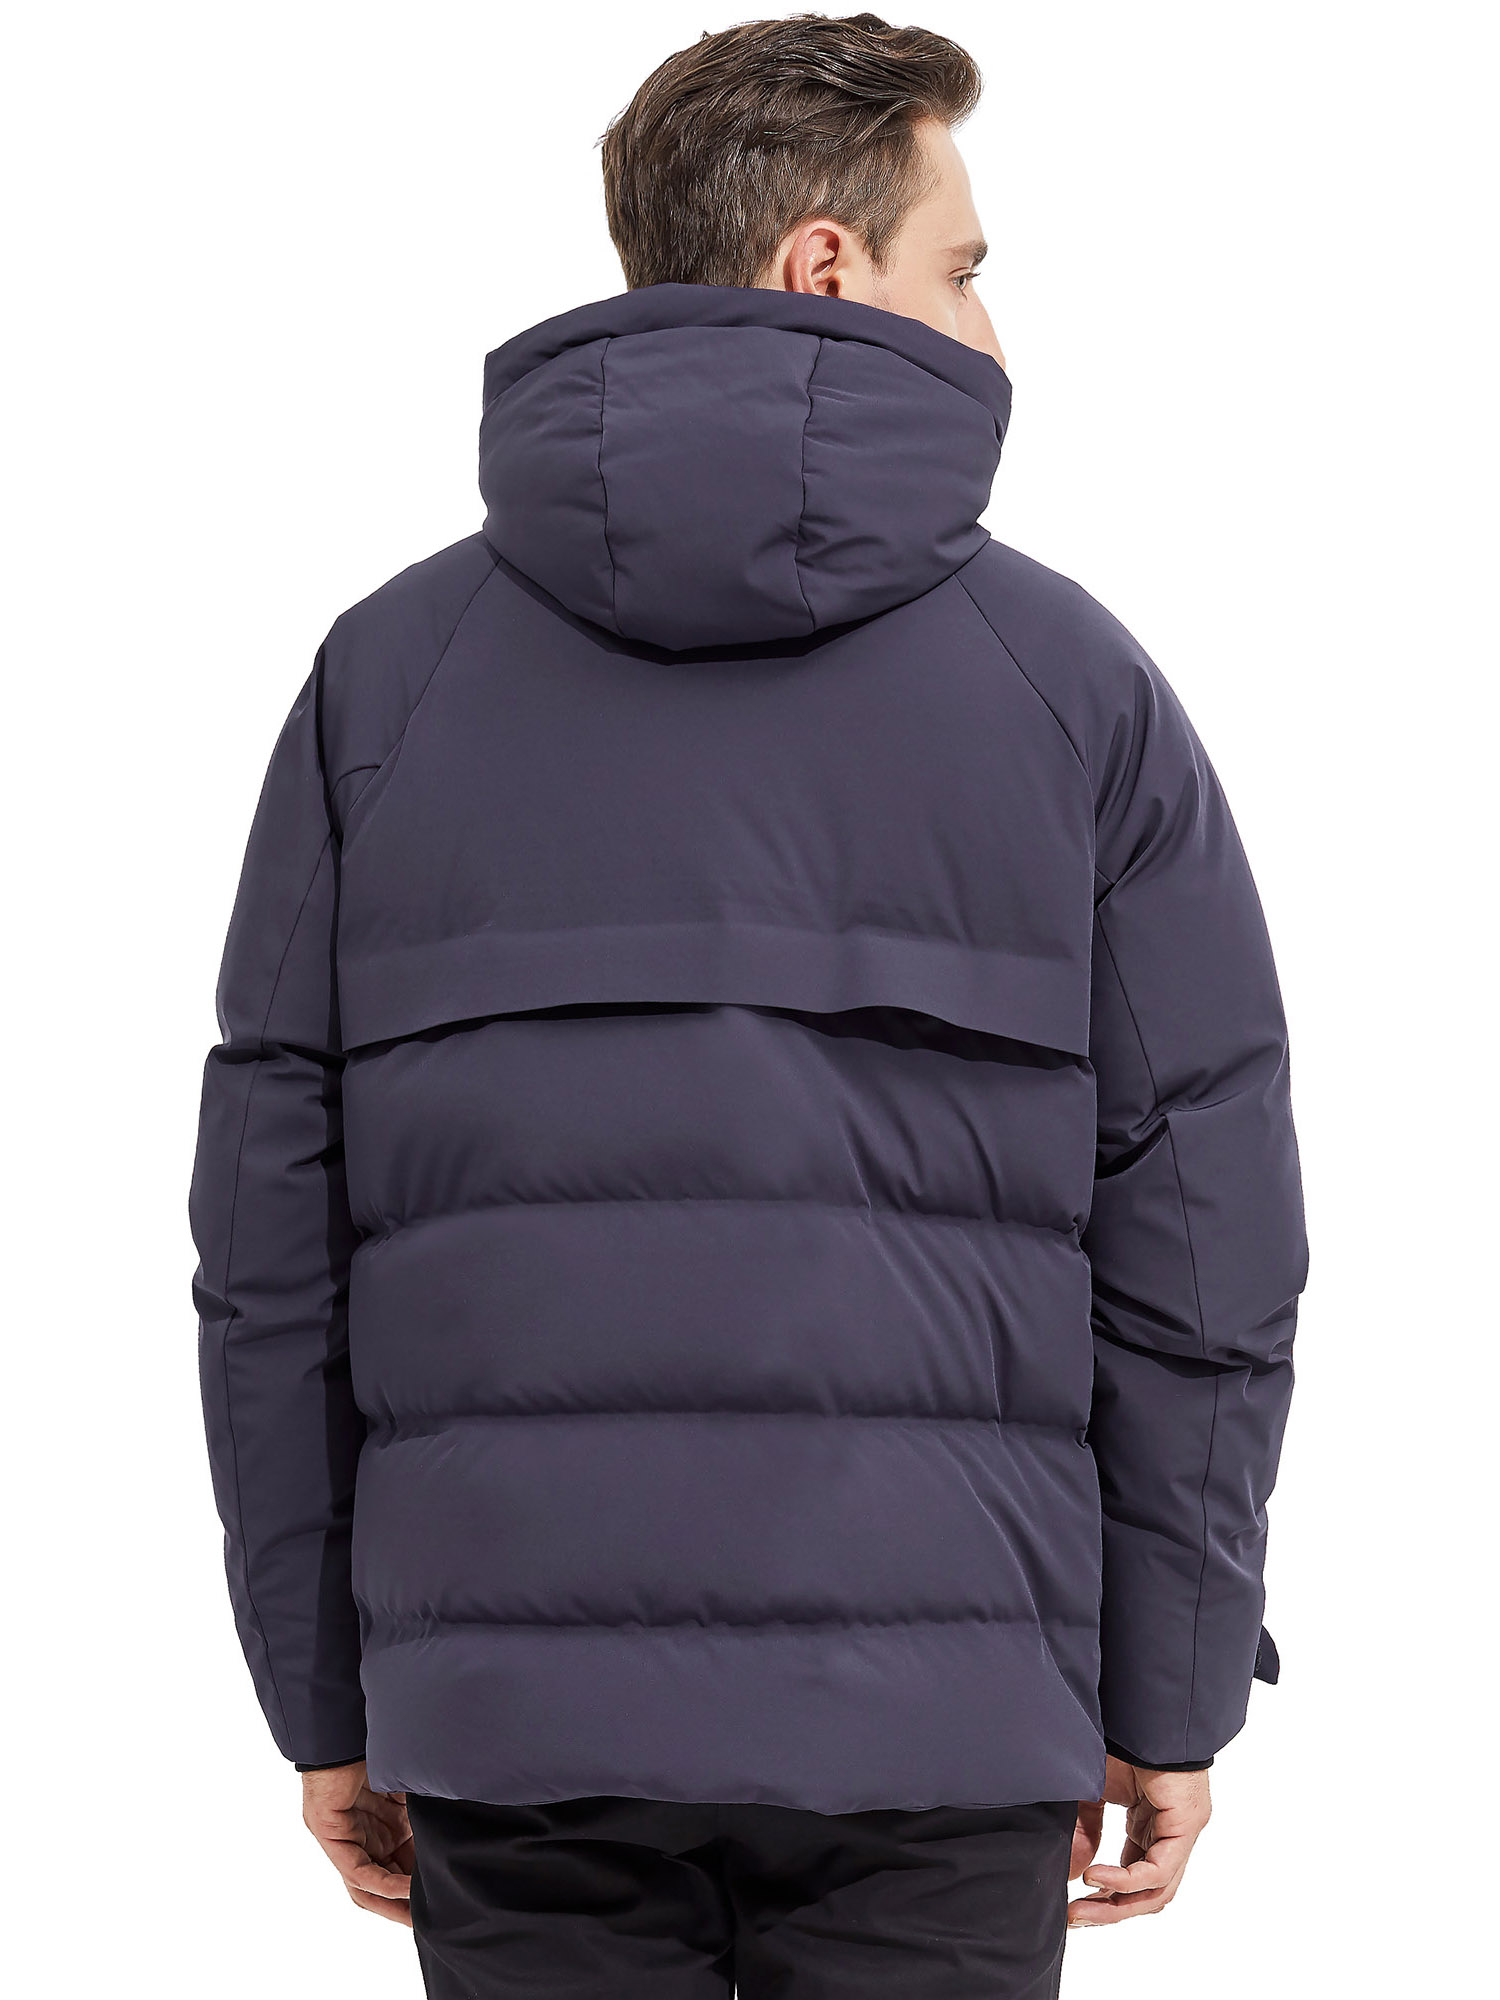 Orolay Men's Winter Down Jacket with Adjustable Drawstring Hood Ribbed Cuff - image 3 of 5